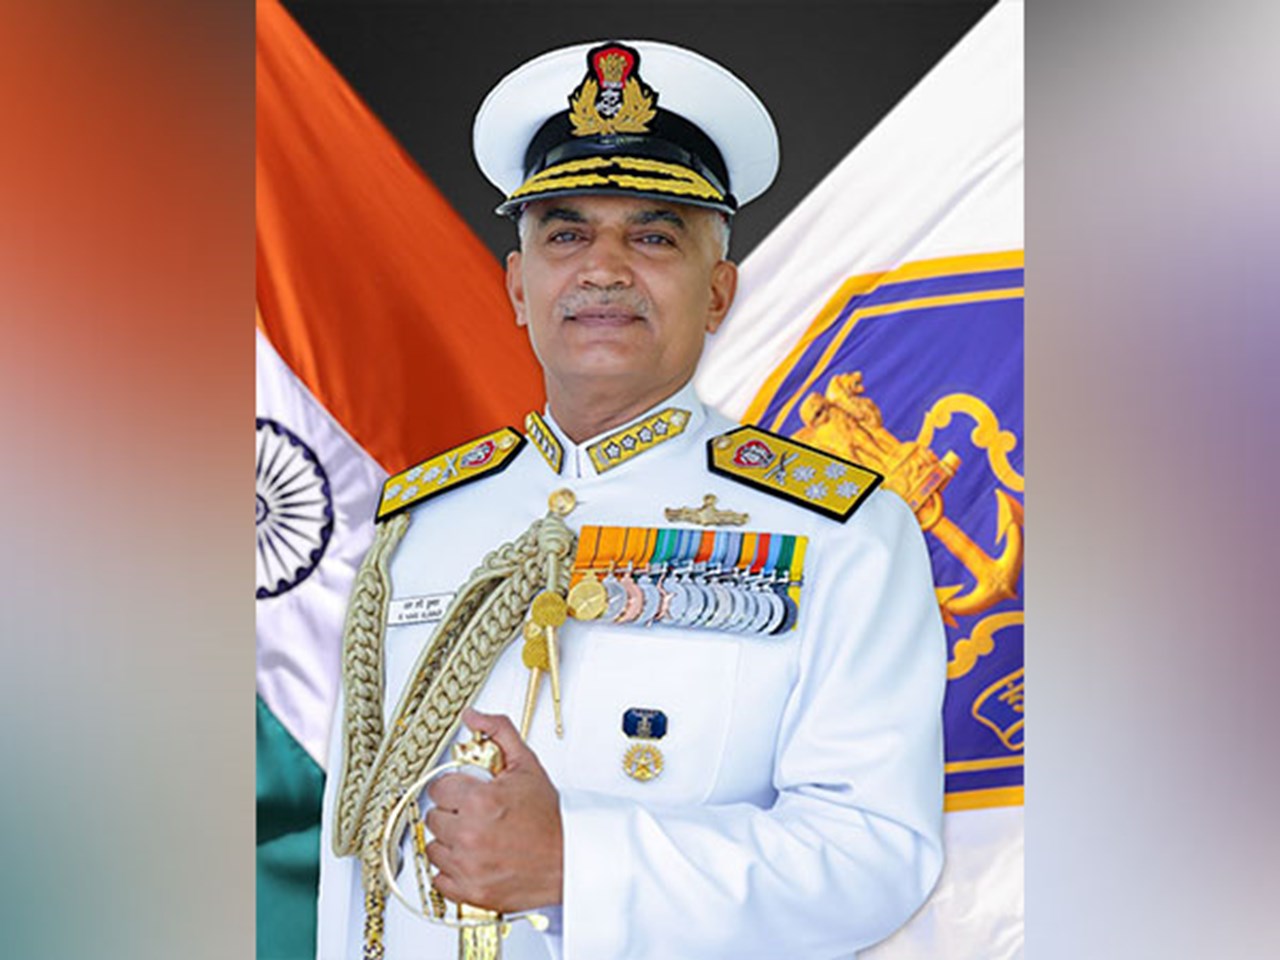 ‘Lot of Chinese ships which operate in the Indian Ocean Region’, says Navy Chief